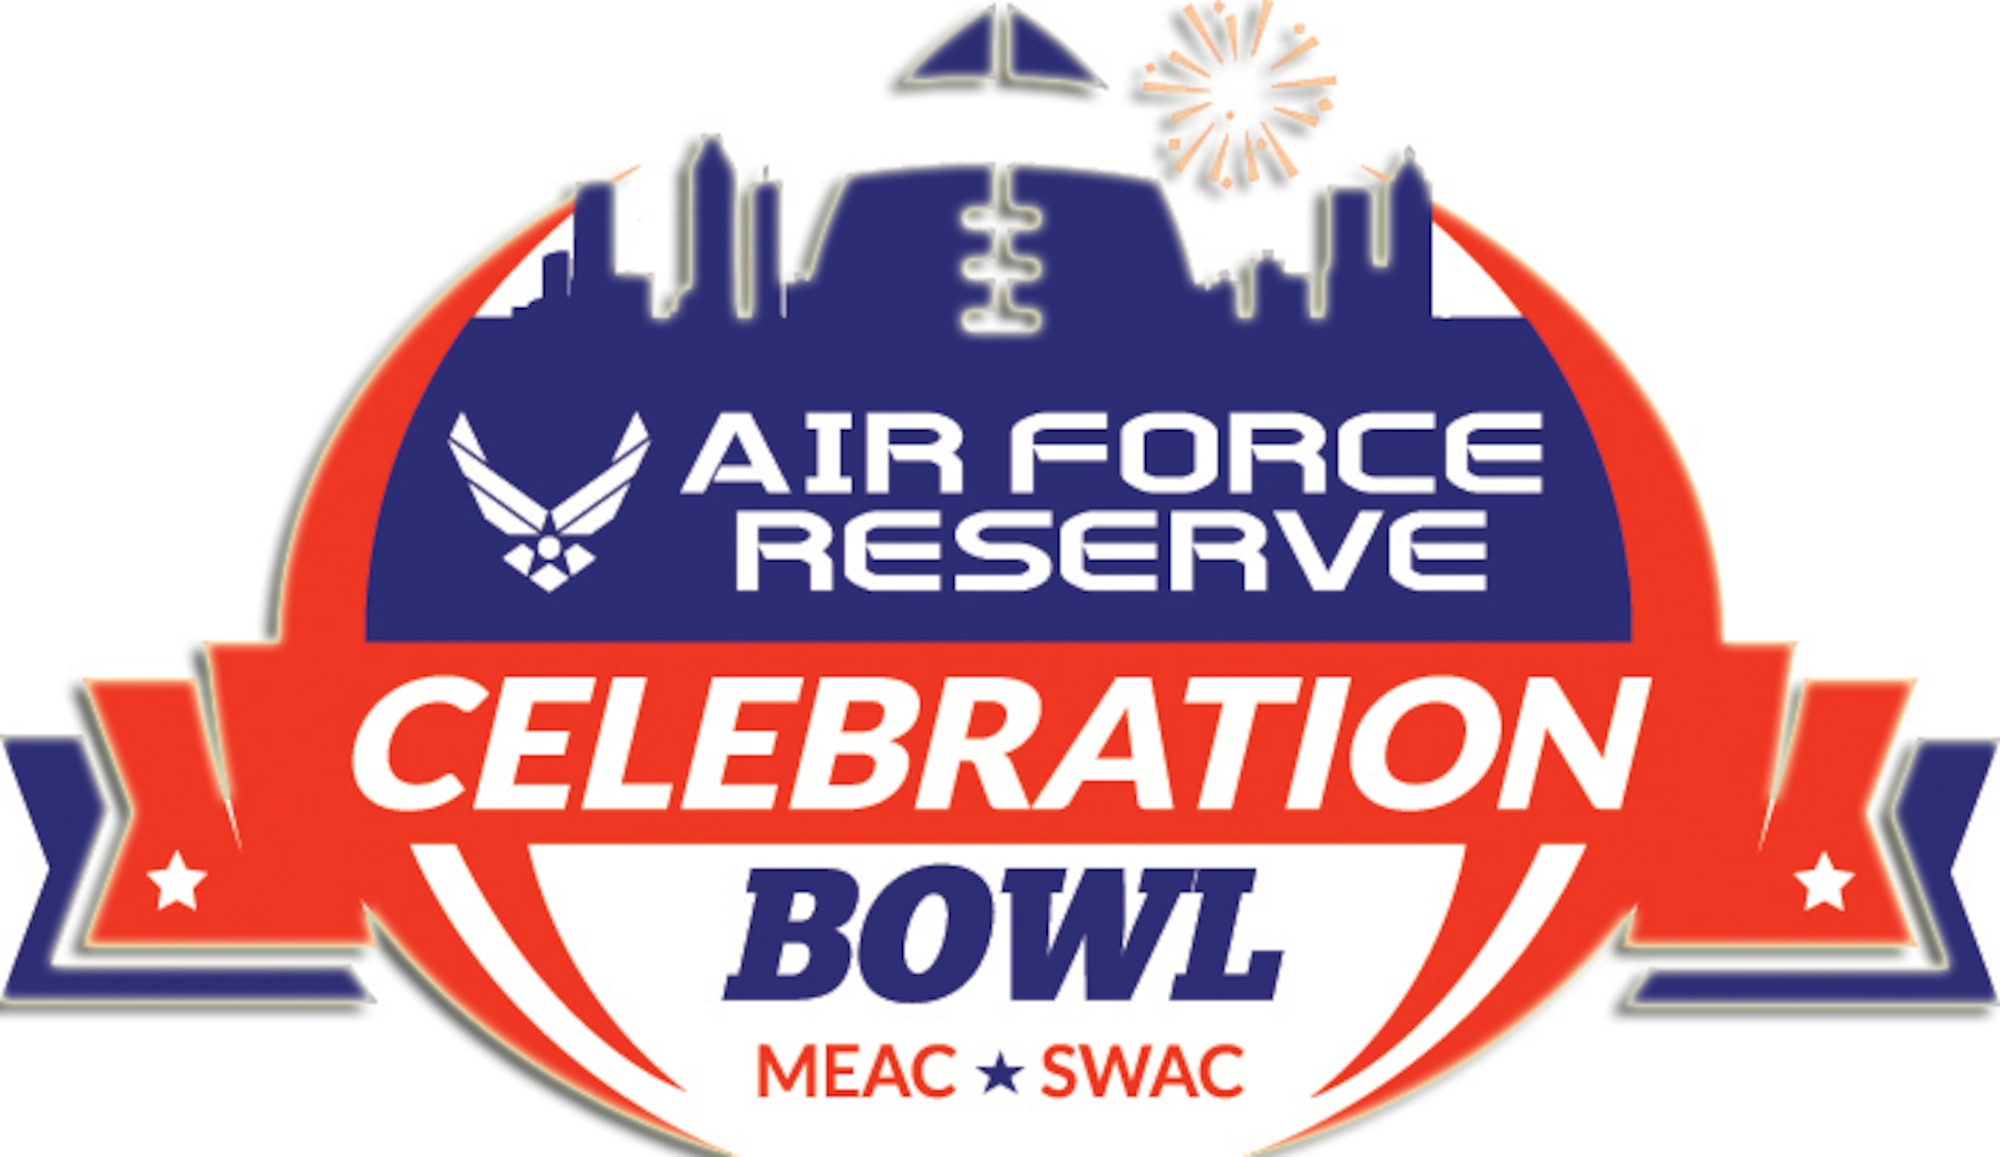 Air Force Reserve will join the new Celebration Bowl as title sponsor of the game that will open the college football bowl season. The Air Force Reserve Celebration Bowl will feature the tradition, legacy and pageantry of Historically Black Colleges and Universities and will crown an HBCU football champion as the champions of the Mid-Eastern Athletic Conference square off against the champions of the Southwestern Athletic Conference live on ABC at noon Dec. 19, at the Georgia Dome in Atlanta.